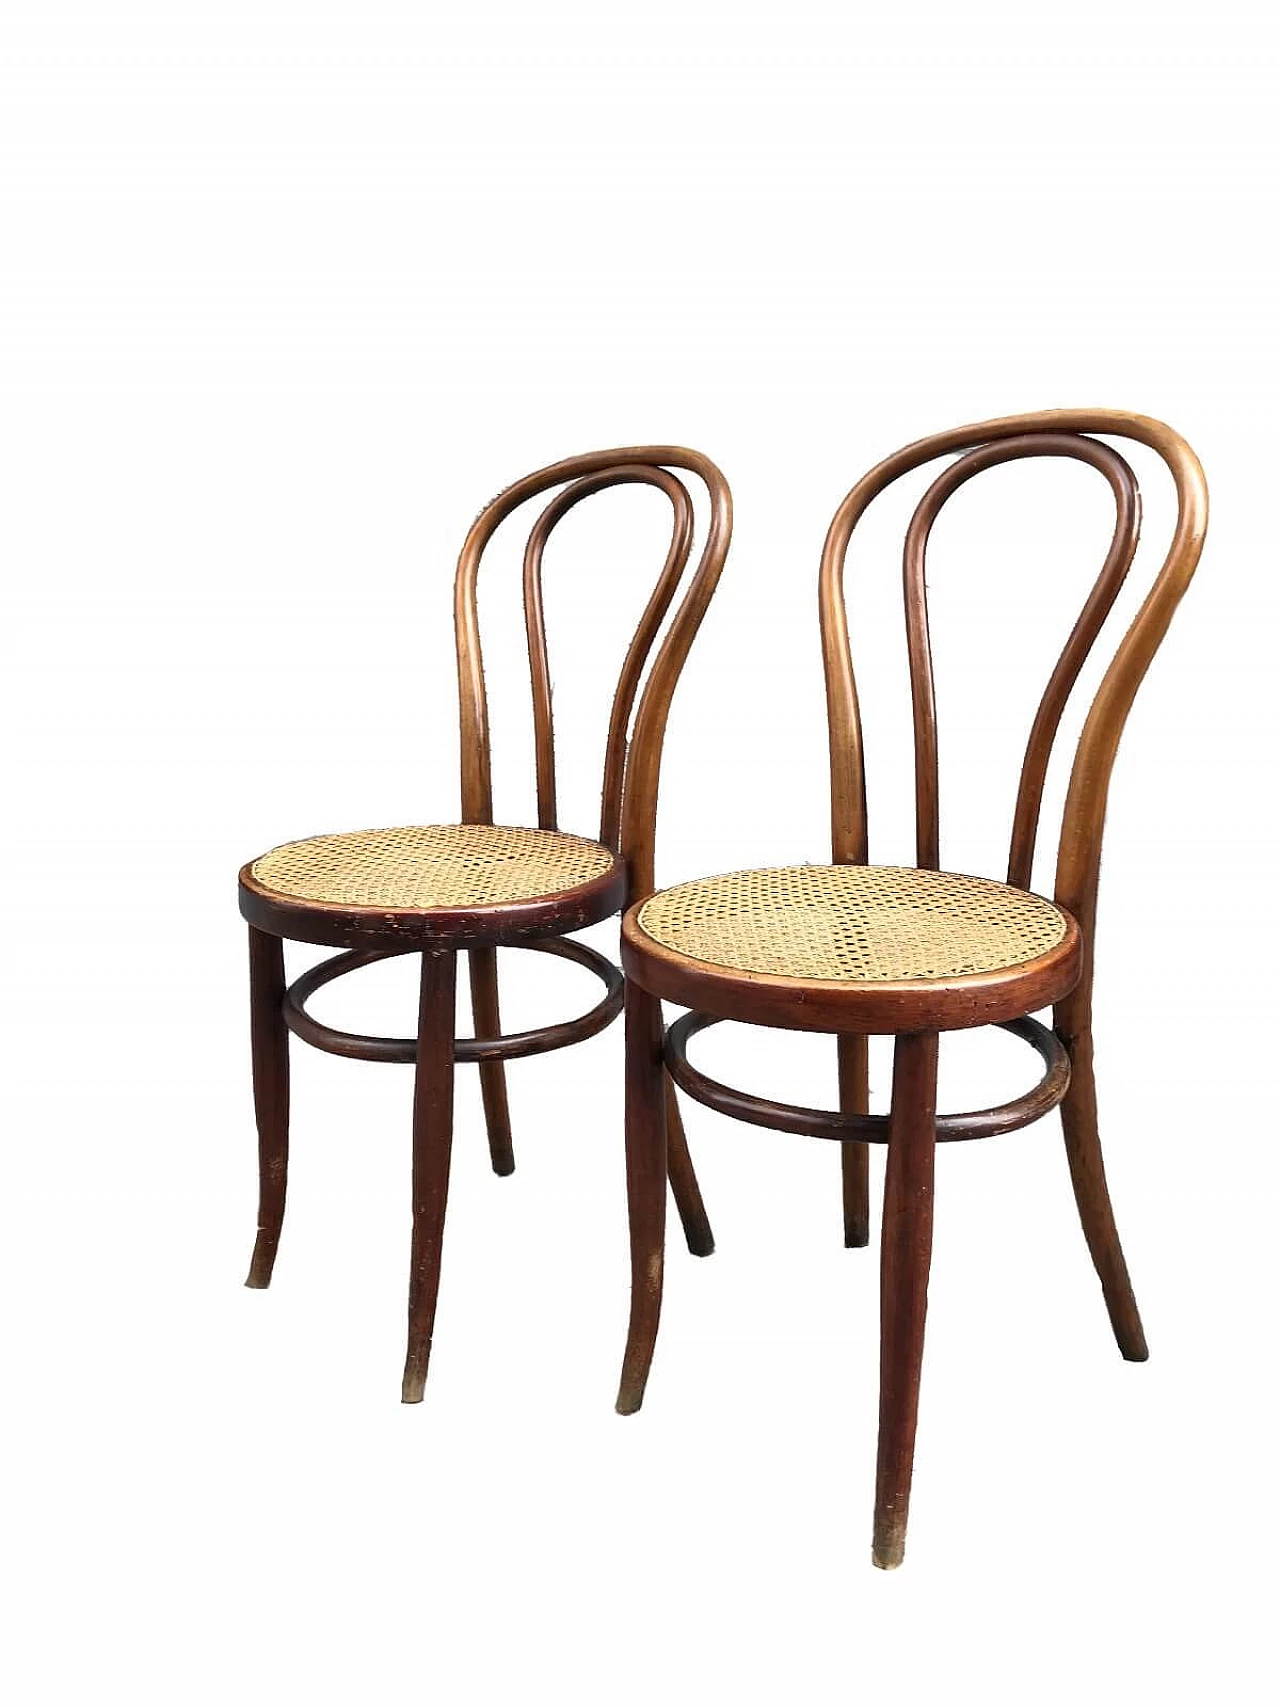 Pair of wooden chairs by Jacob & Joseph Kohn, late 19th century 12